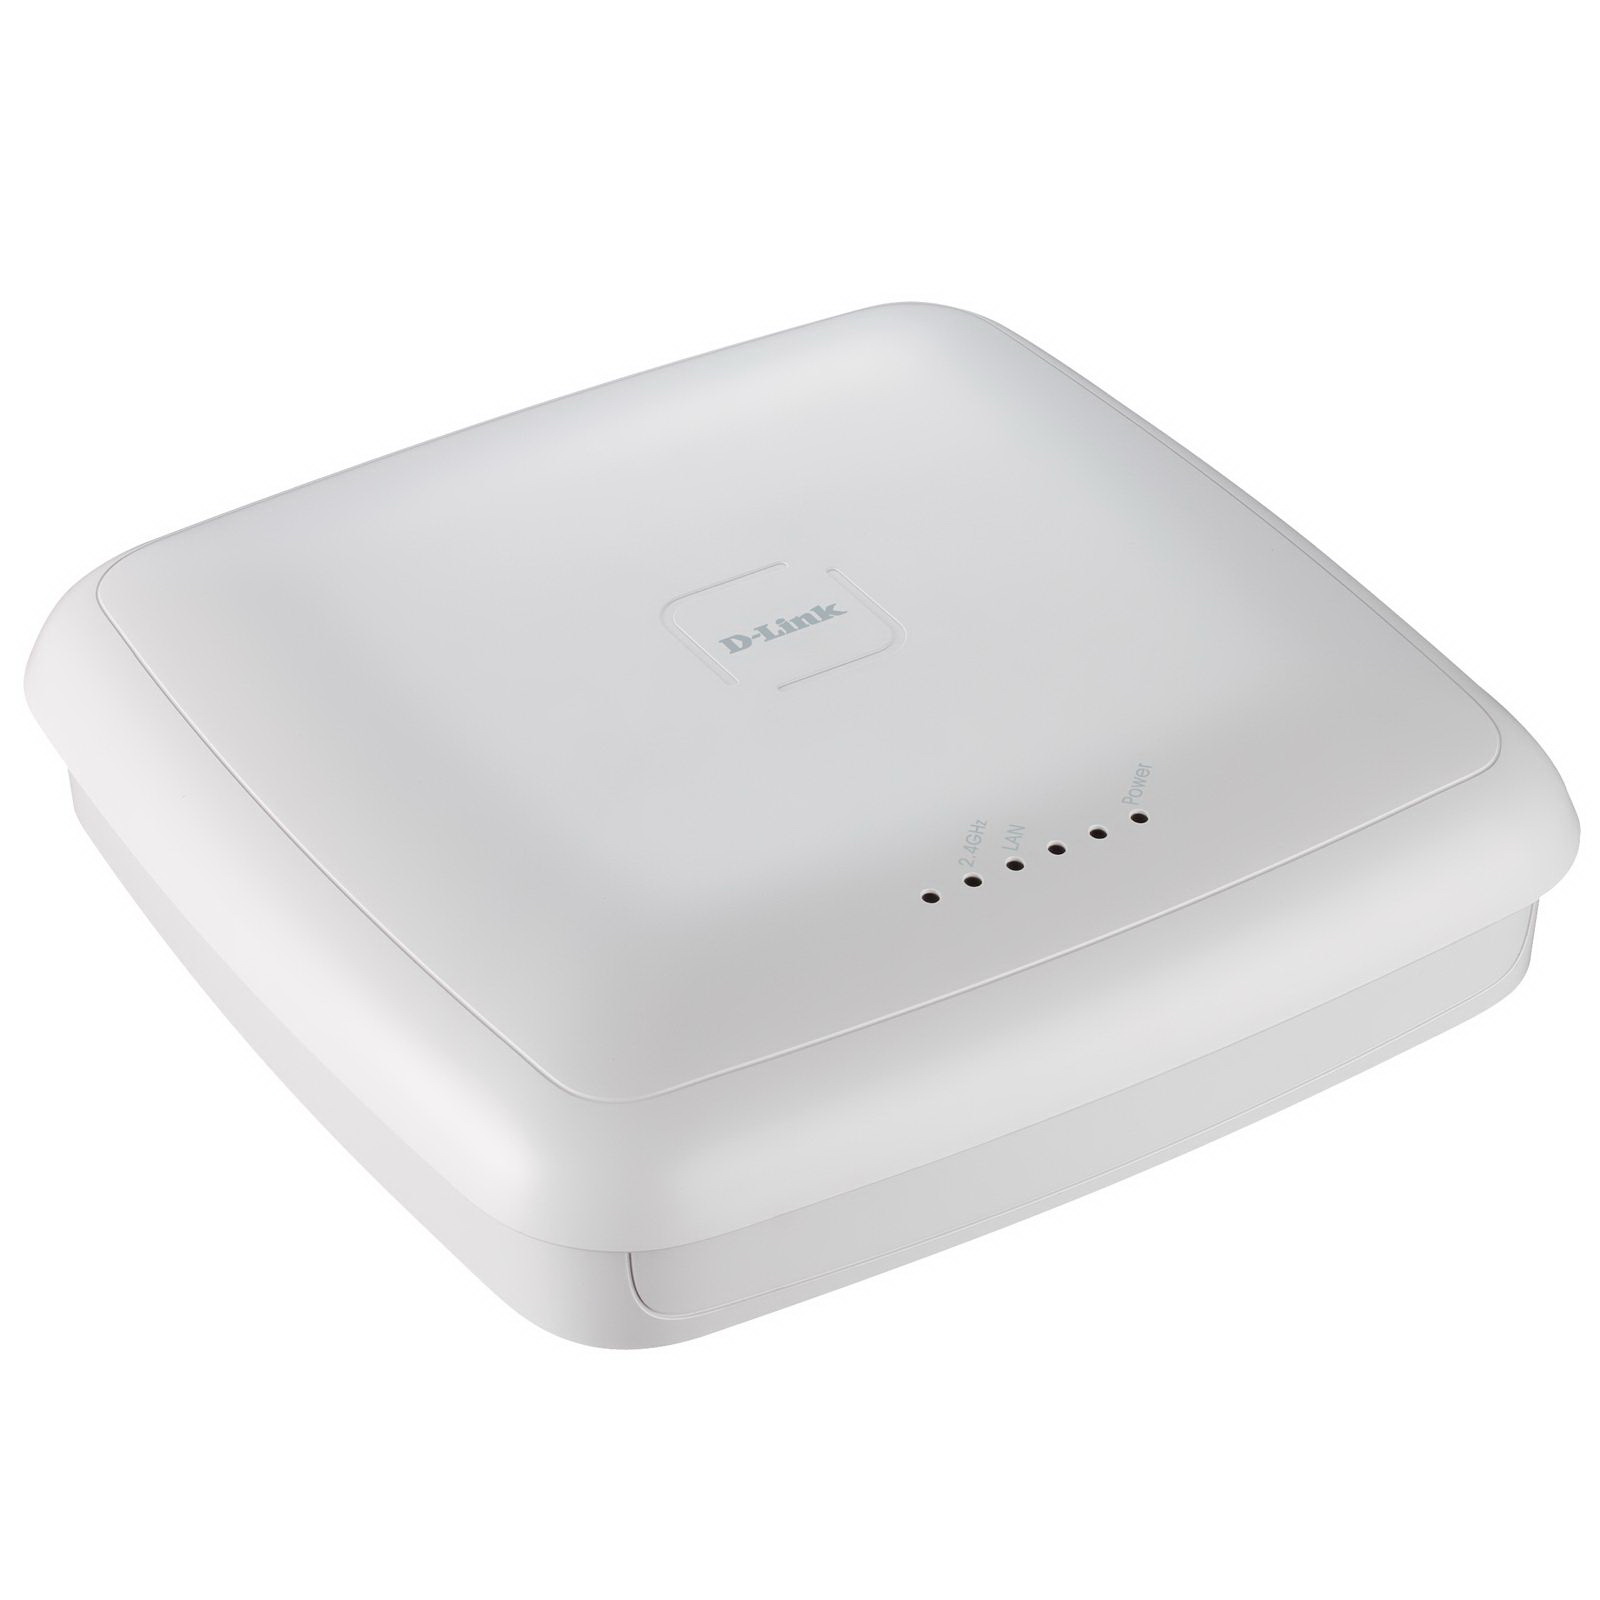 DWL-3600AP D-Link Unified 802.11N 2.4 GHz Single-Band Access Point (Refurbished)